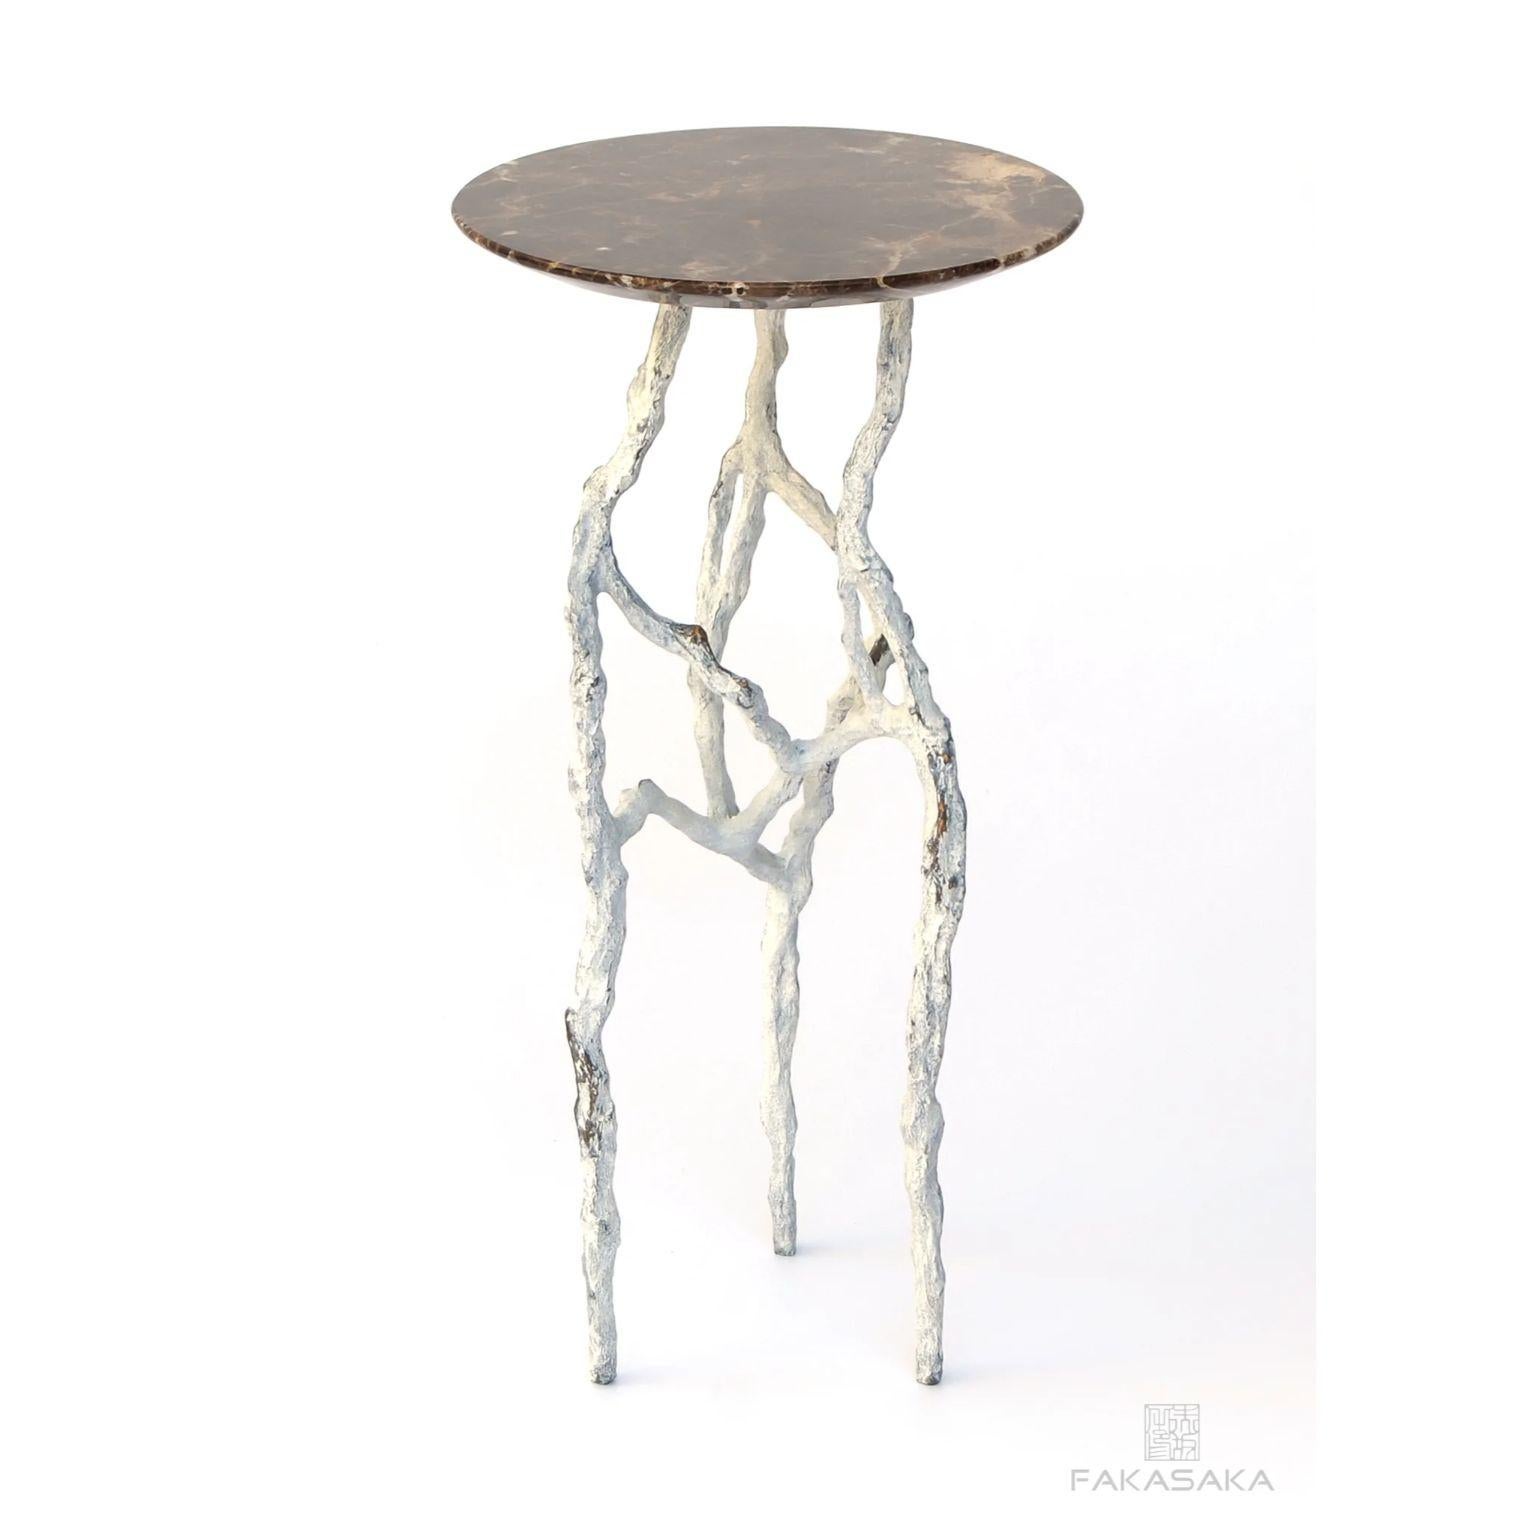 Brazilian Alexia 3 Drink Table with Marrom Imperial Marble Top by Fakasaka Design For Sale